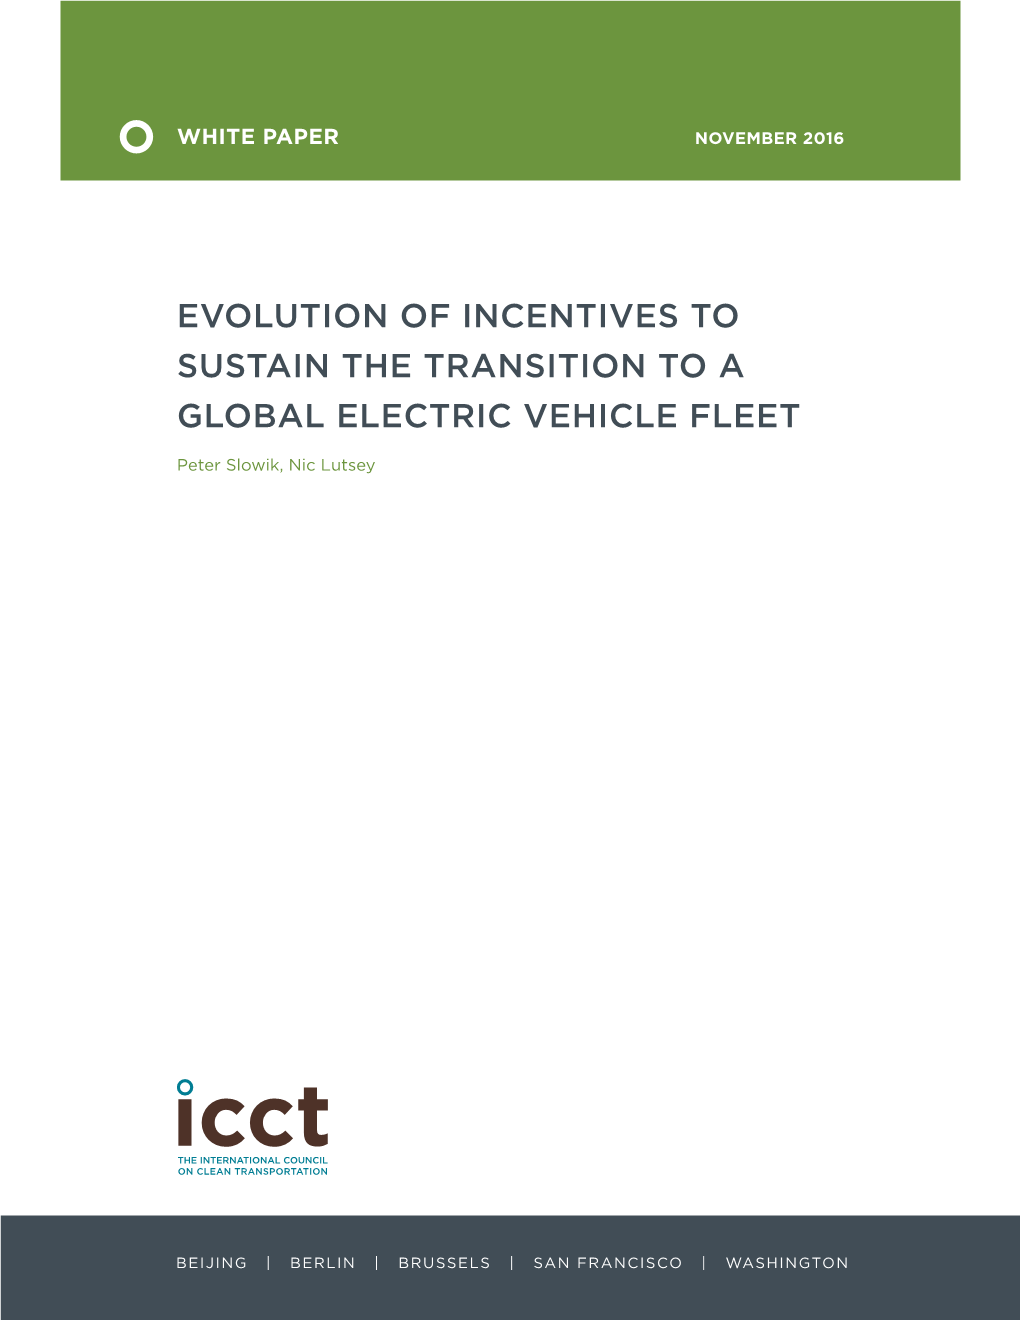 Evolution of Incentives to Sustain the Transition to a Global Electric Vehicle Fleet